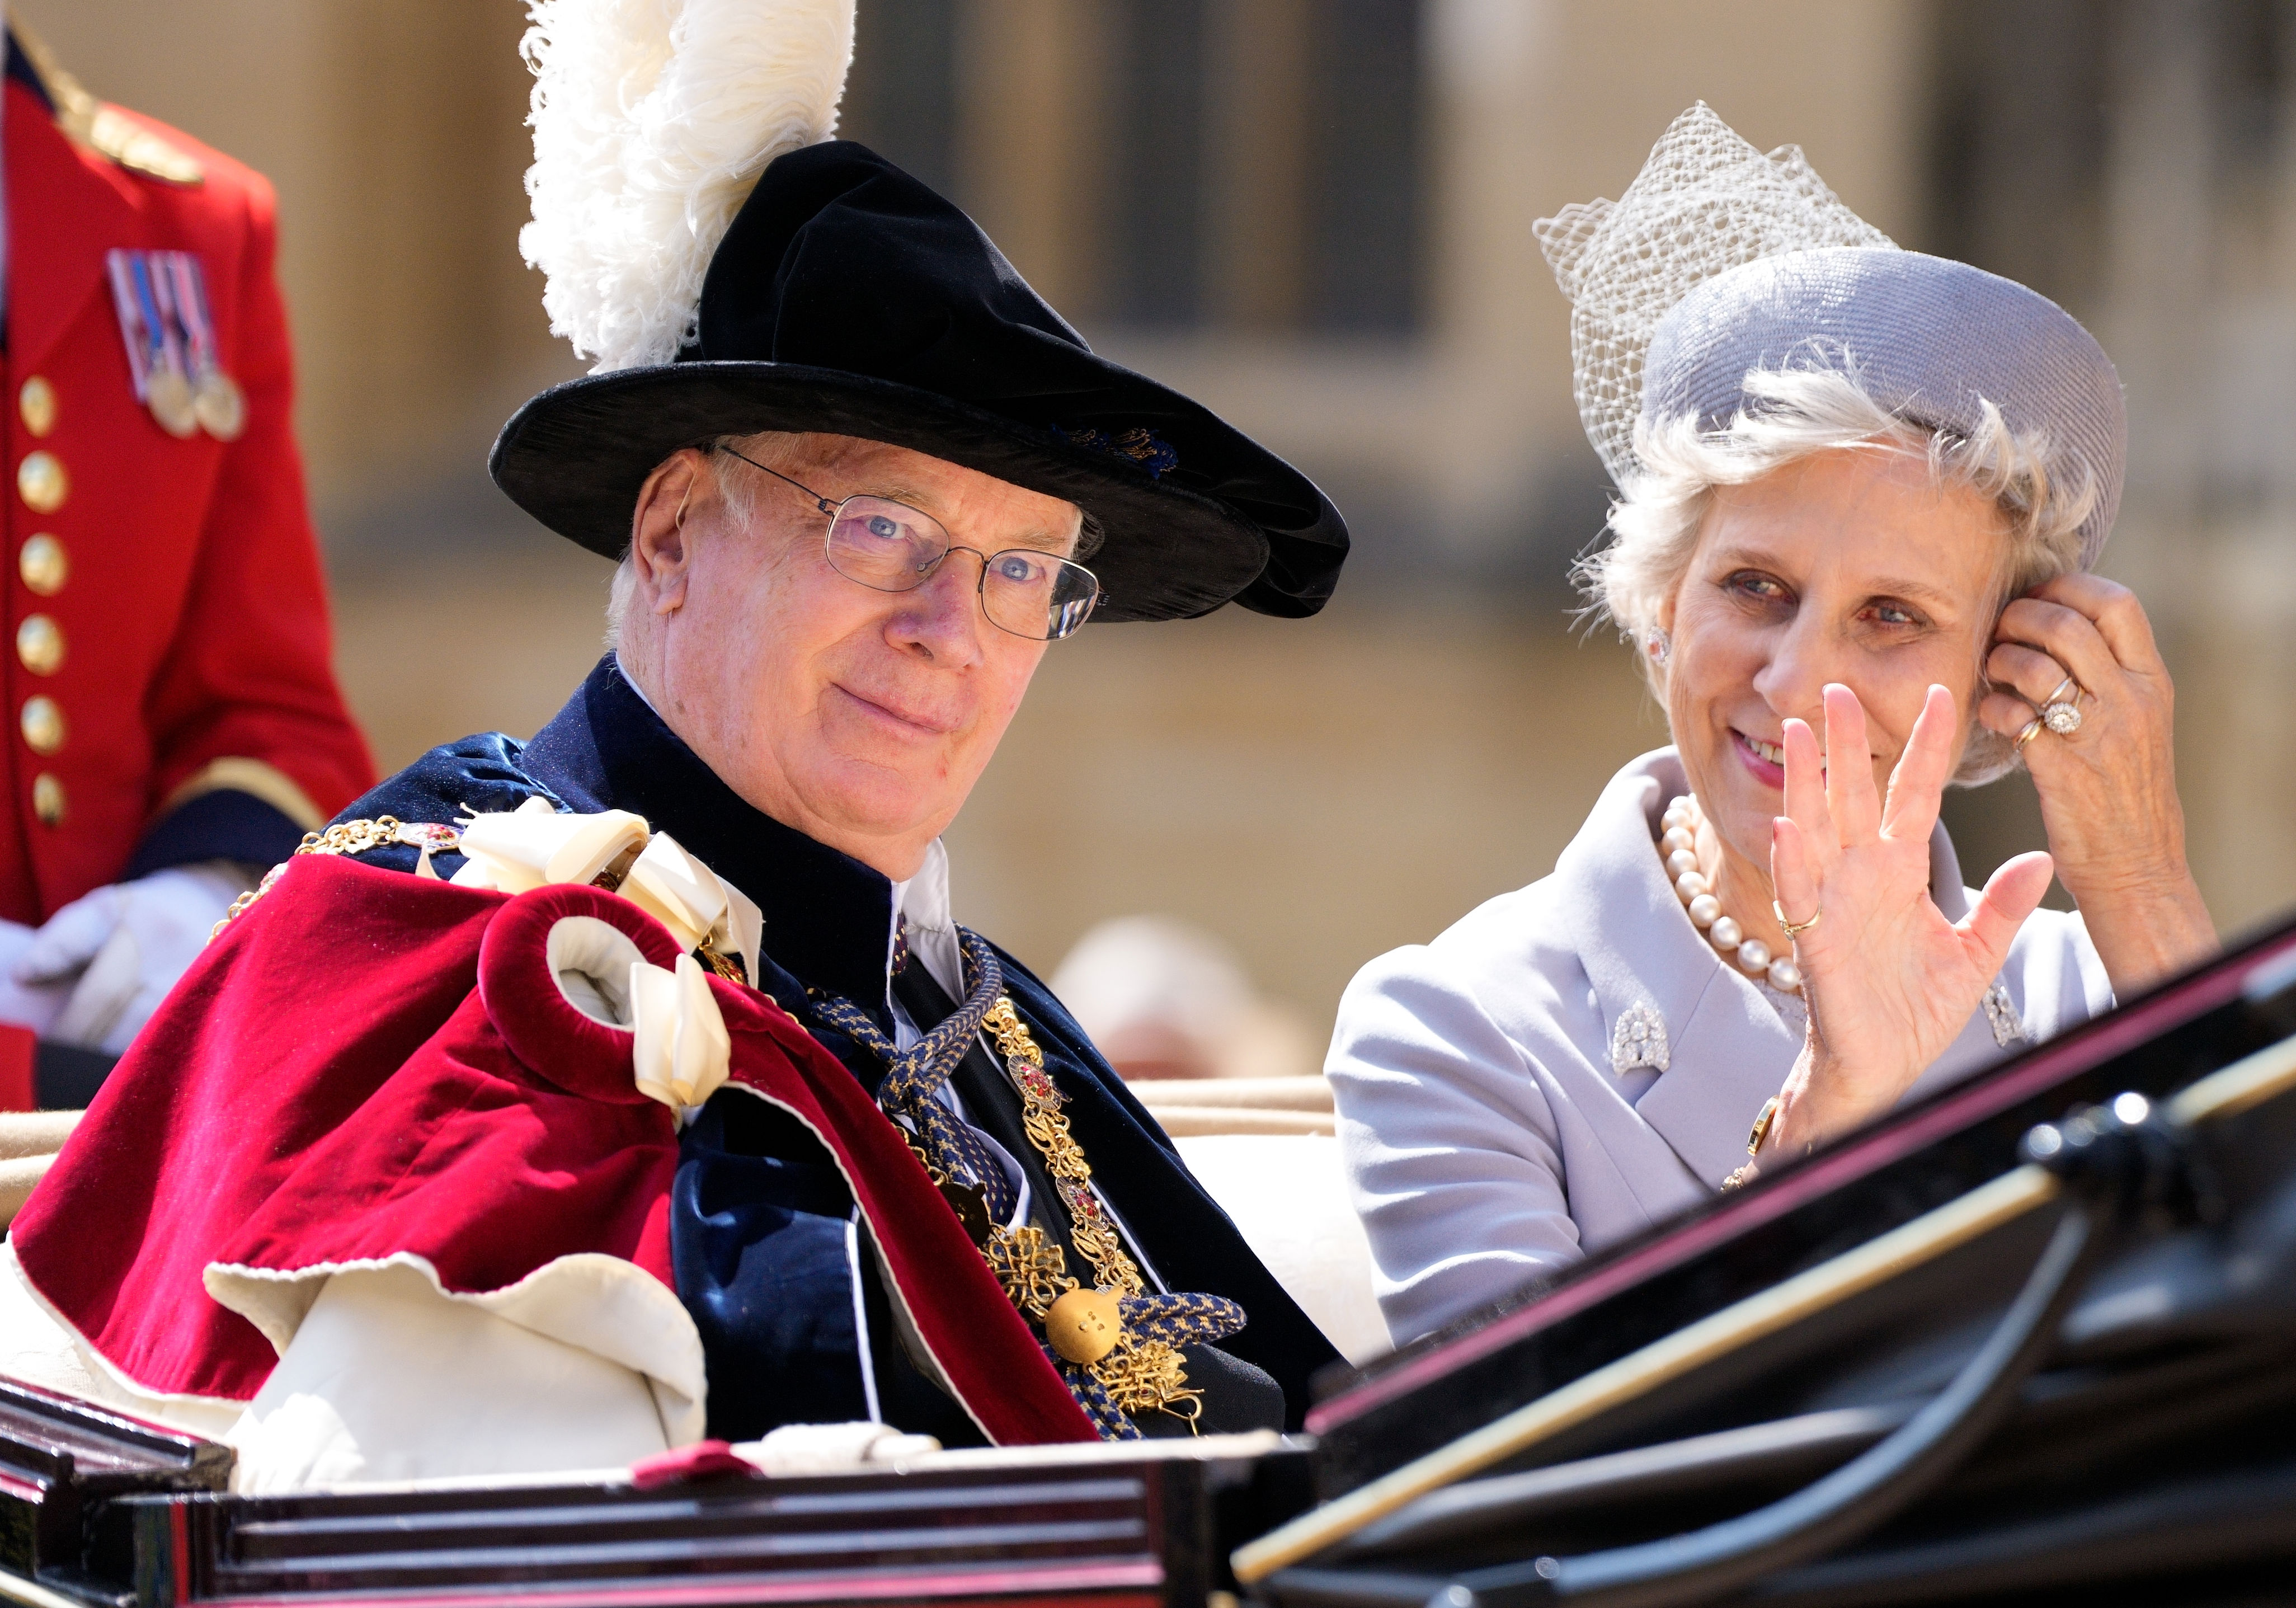 <p>Prince Richard, Duke of Gloucester (seen here with his wife, Birgitte, Duchess of Gloucester) is 31st in line to the throne. </p><p>The former architect is a first cousin of the late Queen Elizabeth II and a grandson of Britain's King George V and Queen Mary. </p>